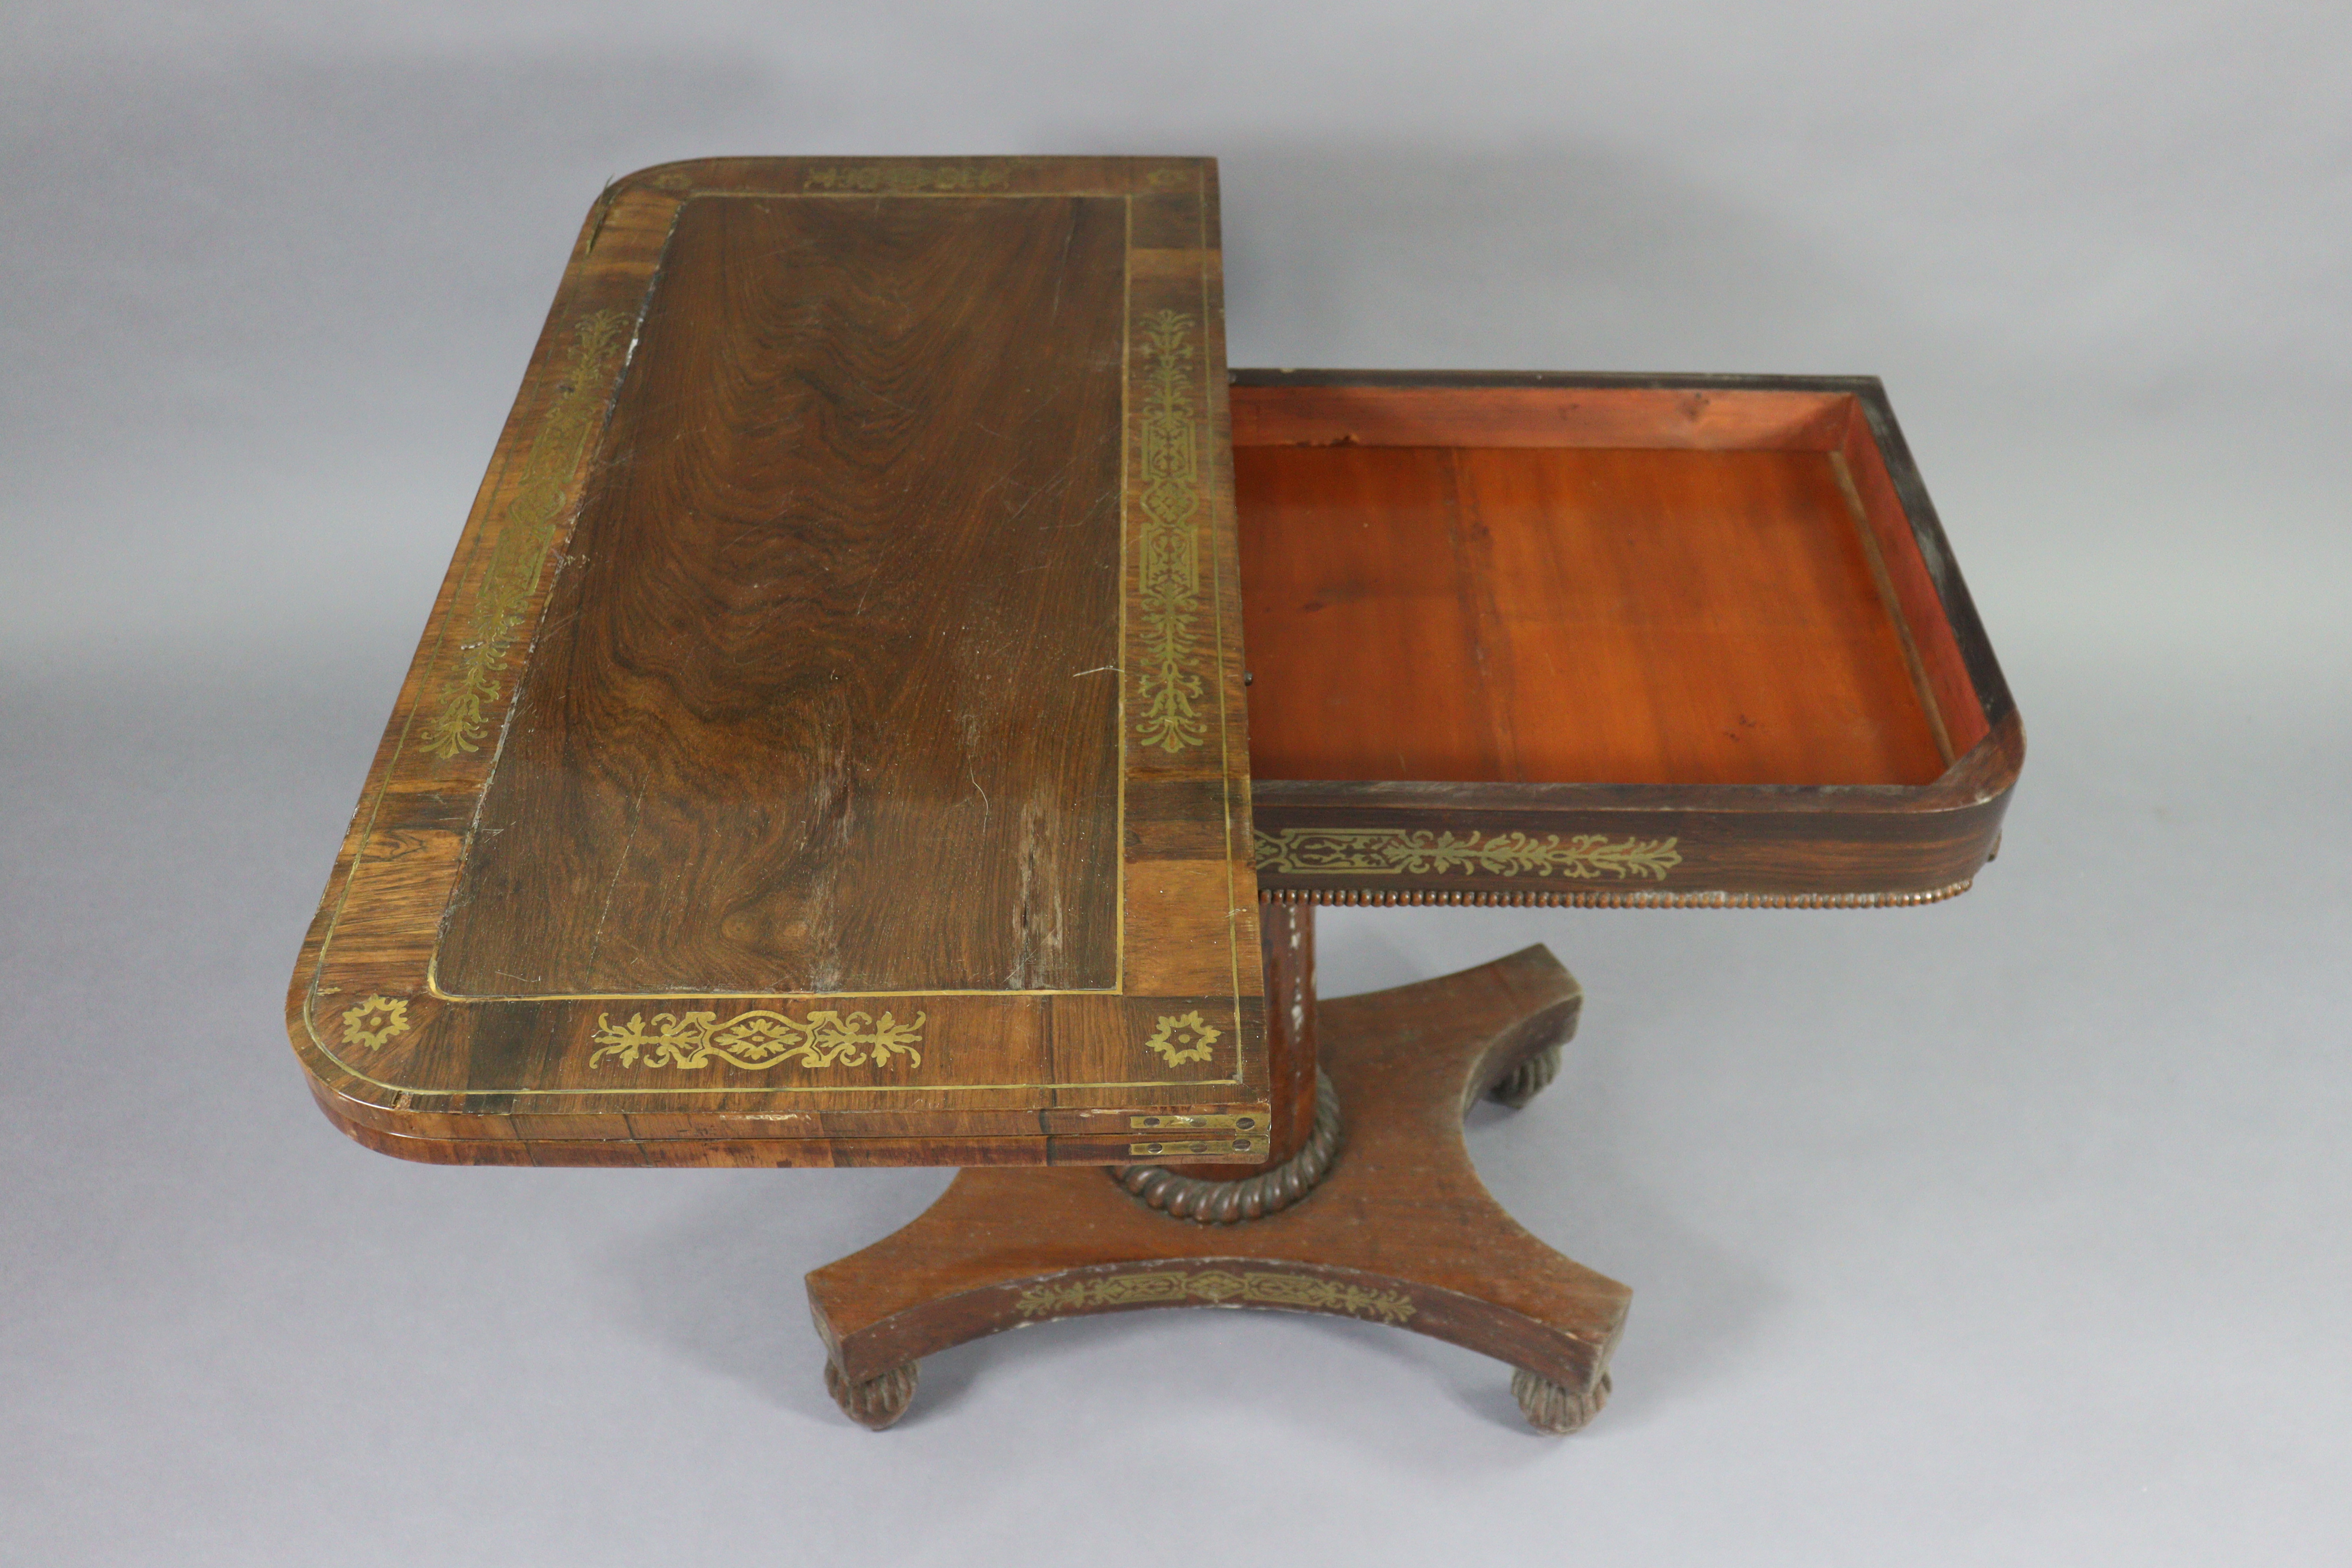 An early 19th century brass-inlaid card table, with rounded corners to the rectangular top, inset gr - Image 4 of 5